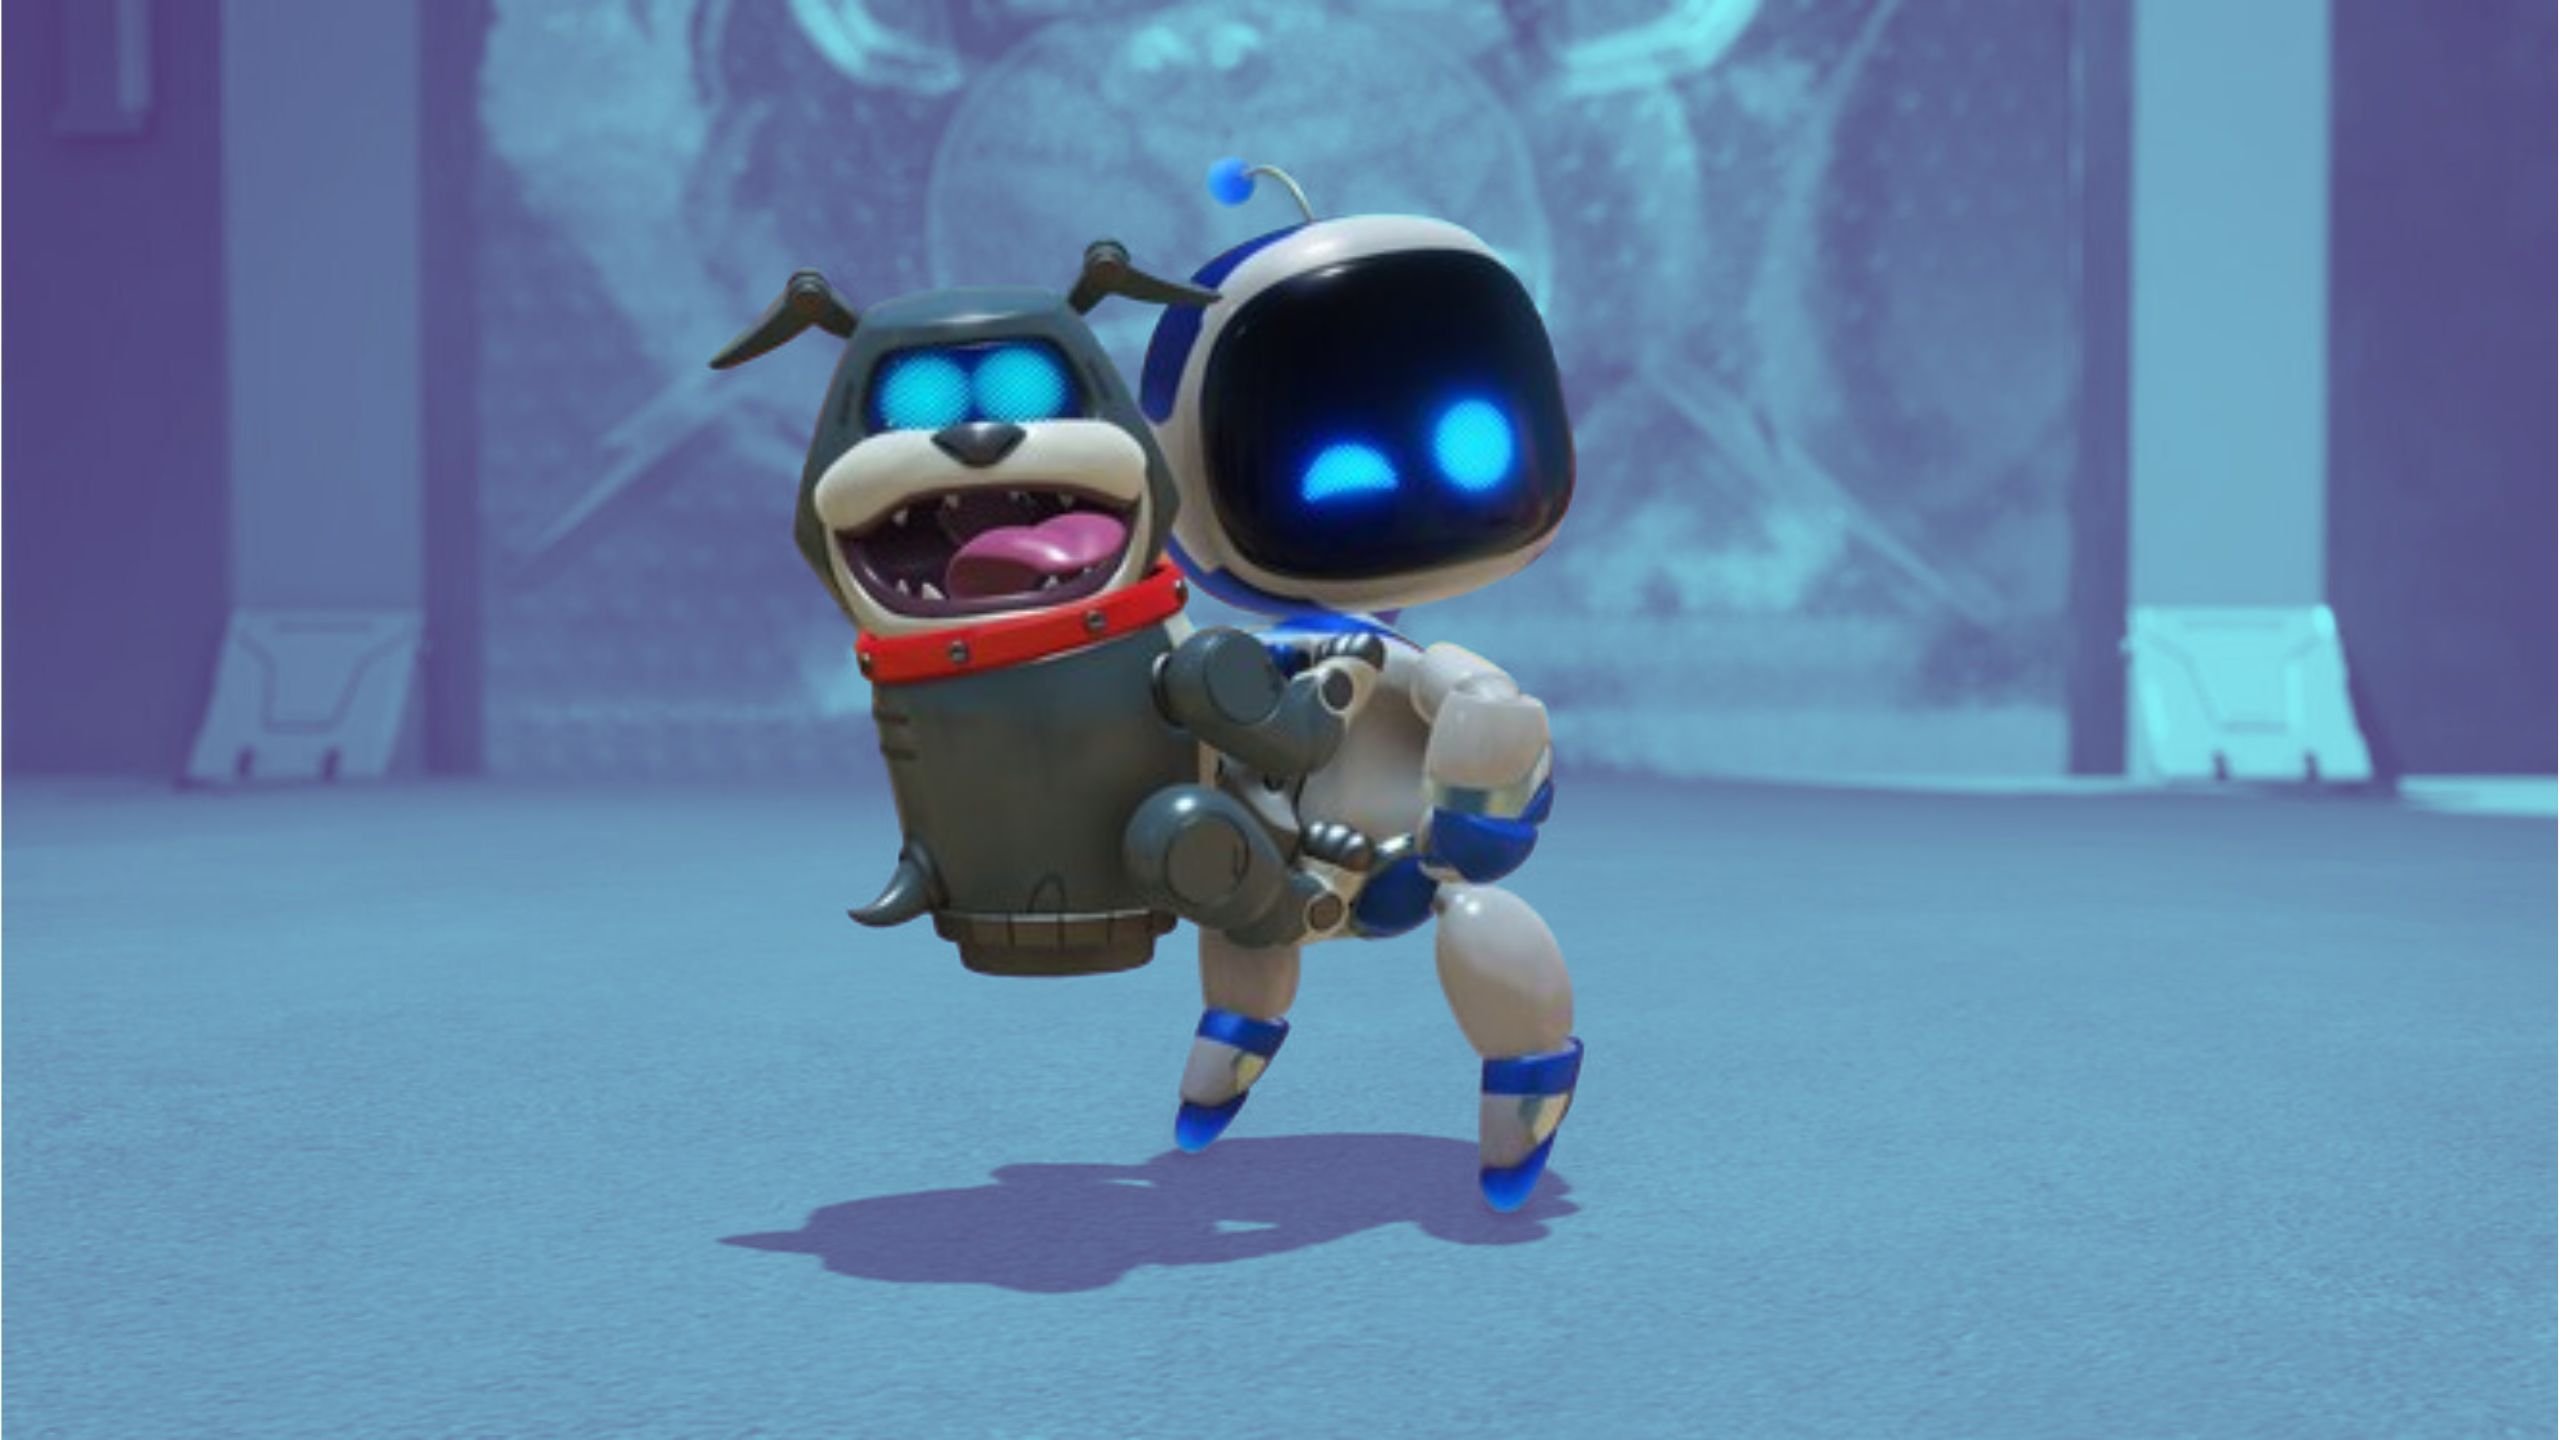 Astro Bot and a dog on his back.